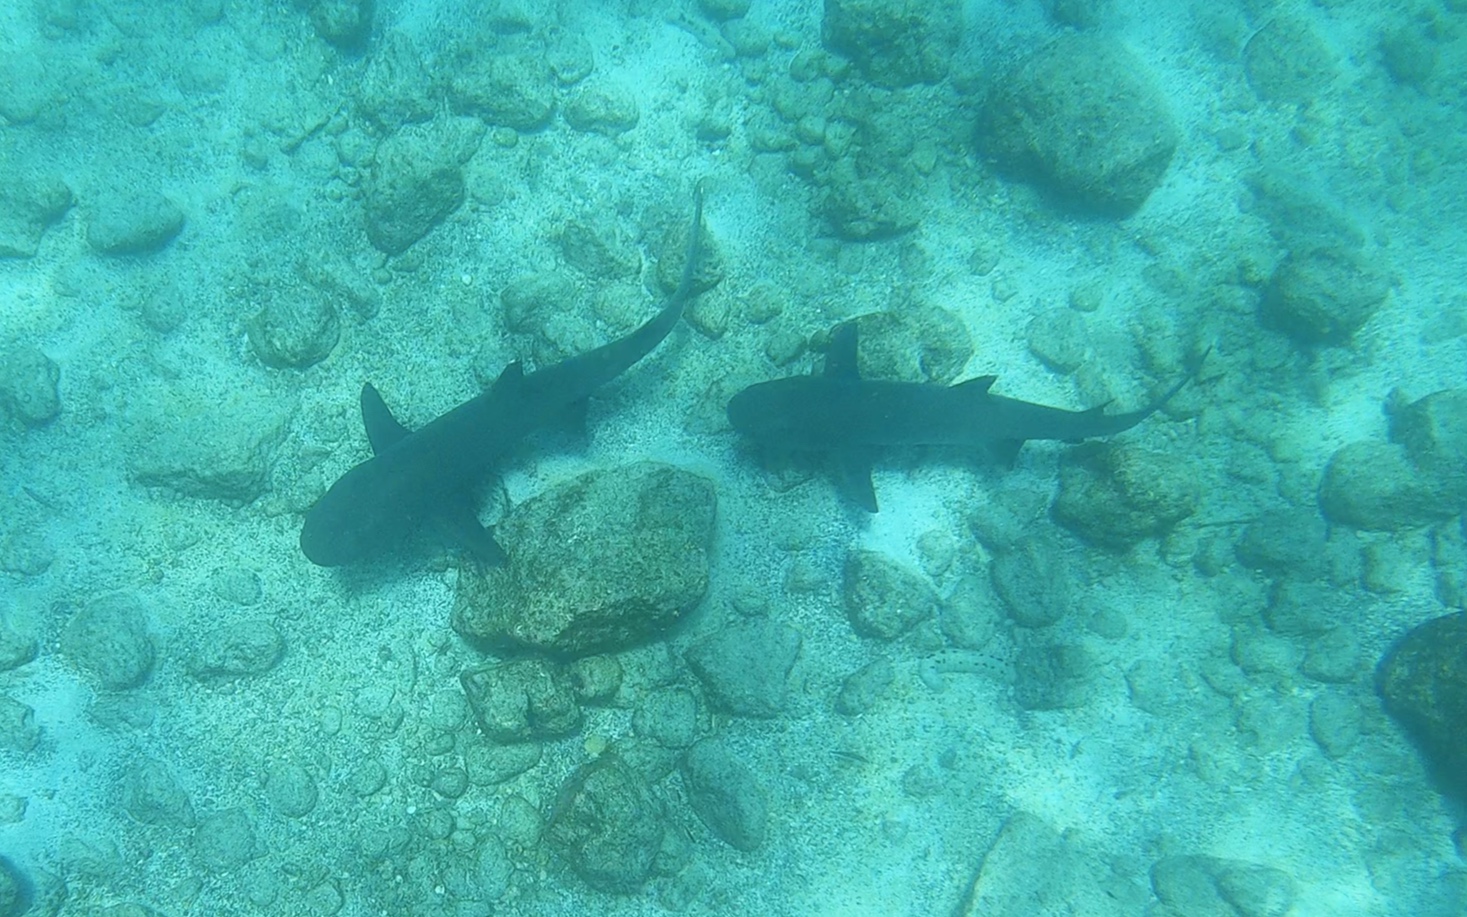  We swam with sharks.  